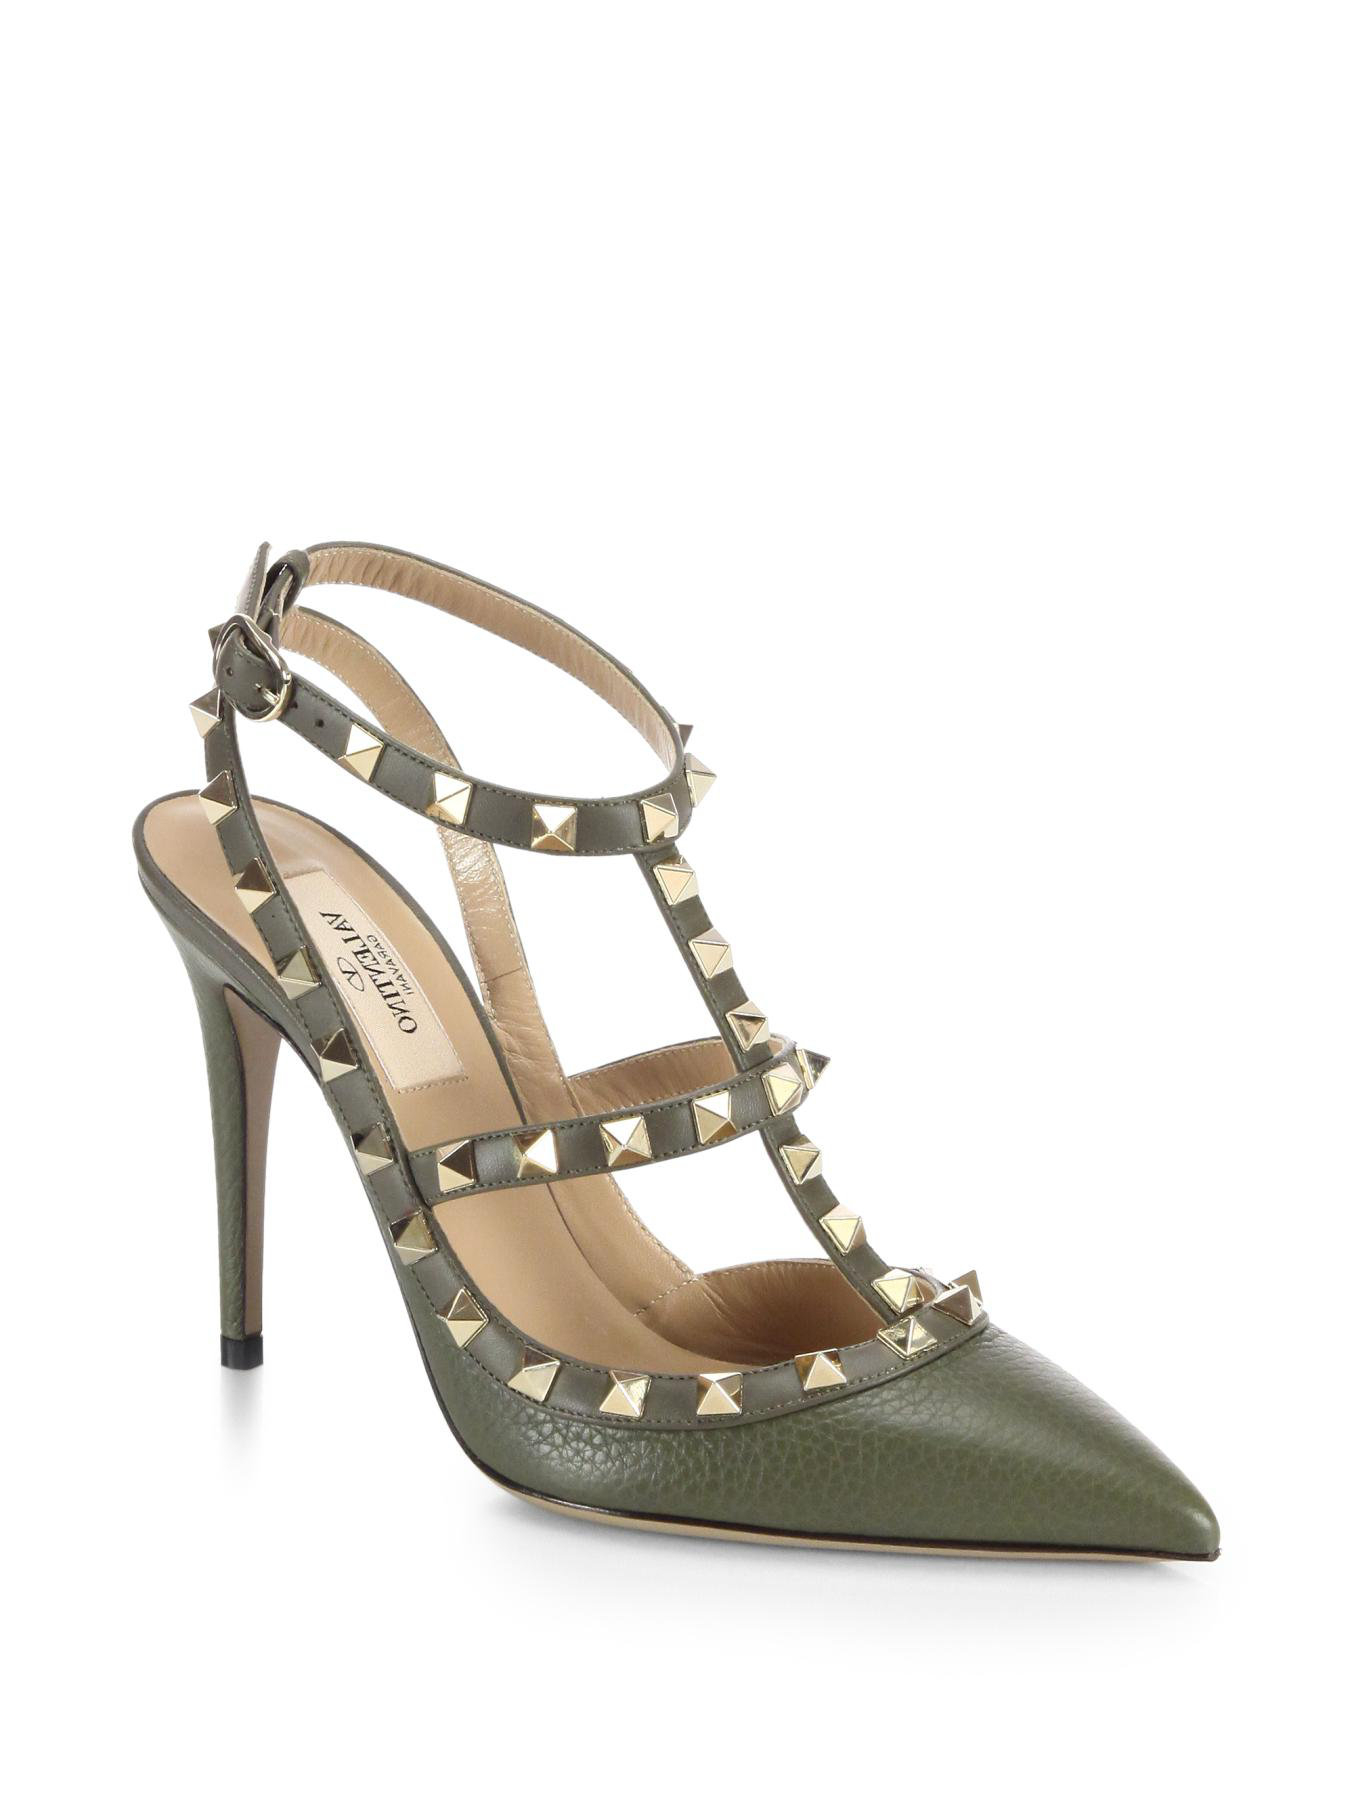 Valentino Rockstud Leather Slingback Pumps in Green (ARMY) | Lyst